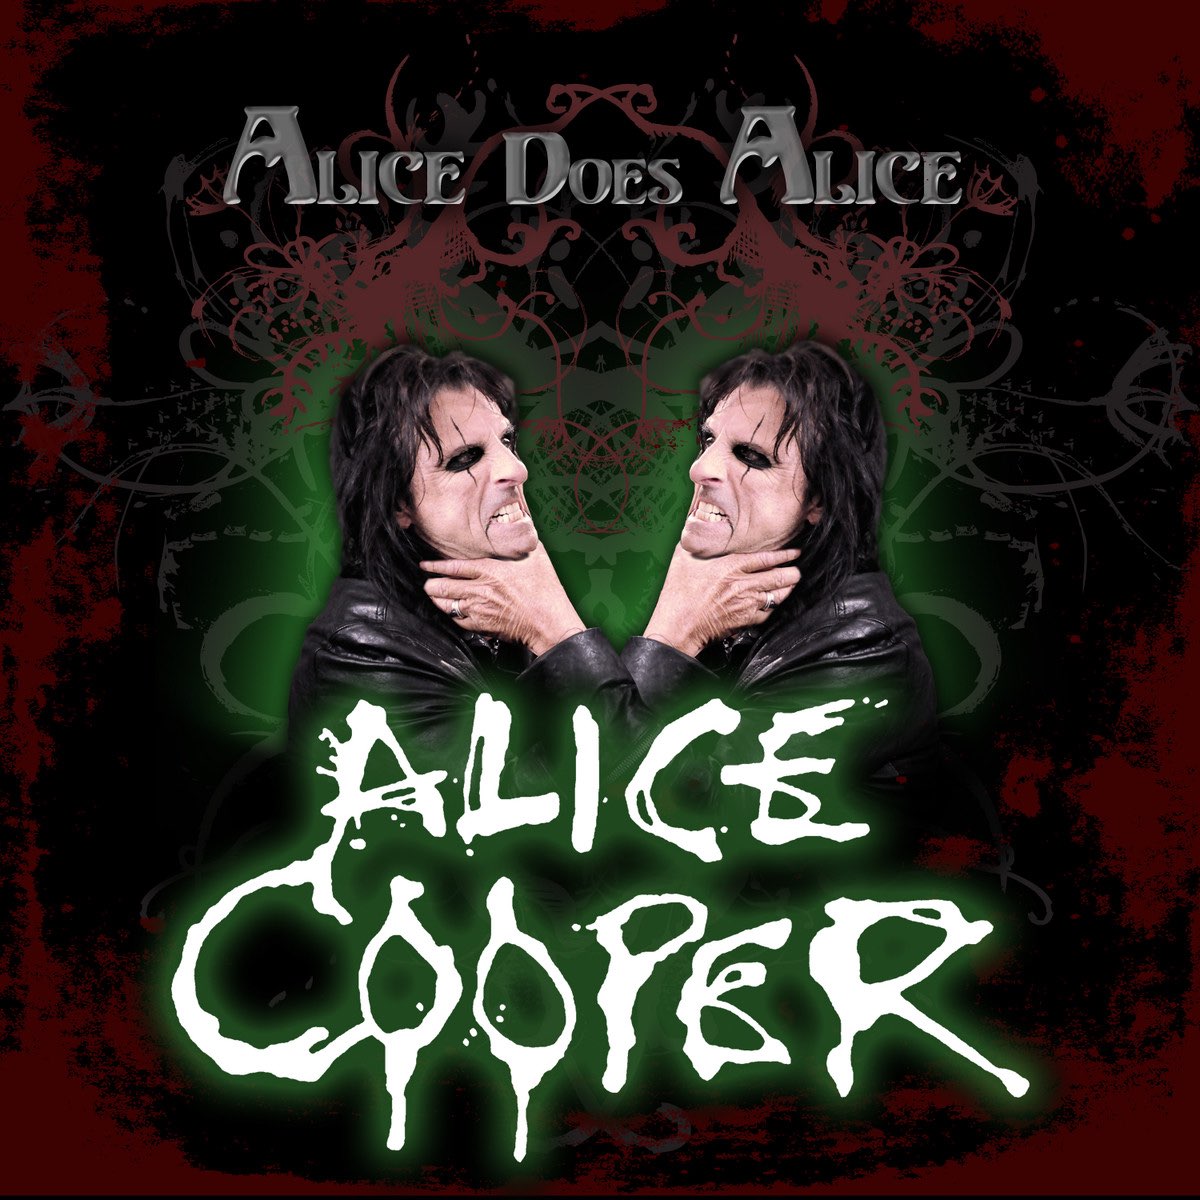 ‎Alice Does Alice - EP by Alice Cooper on Apple Music